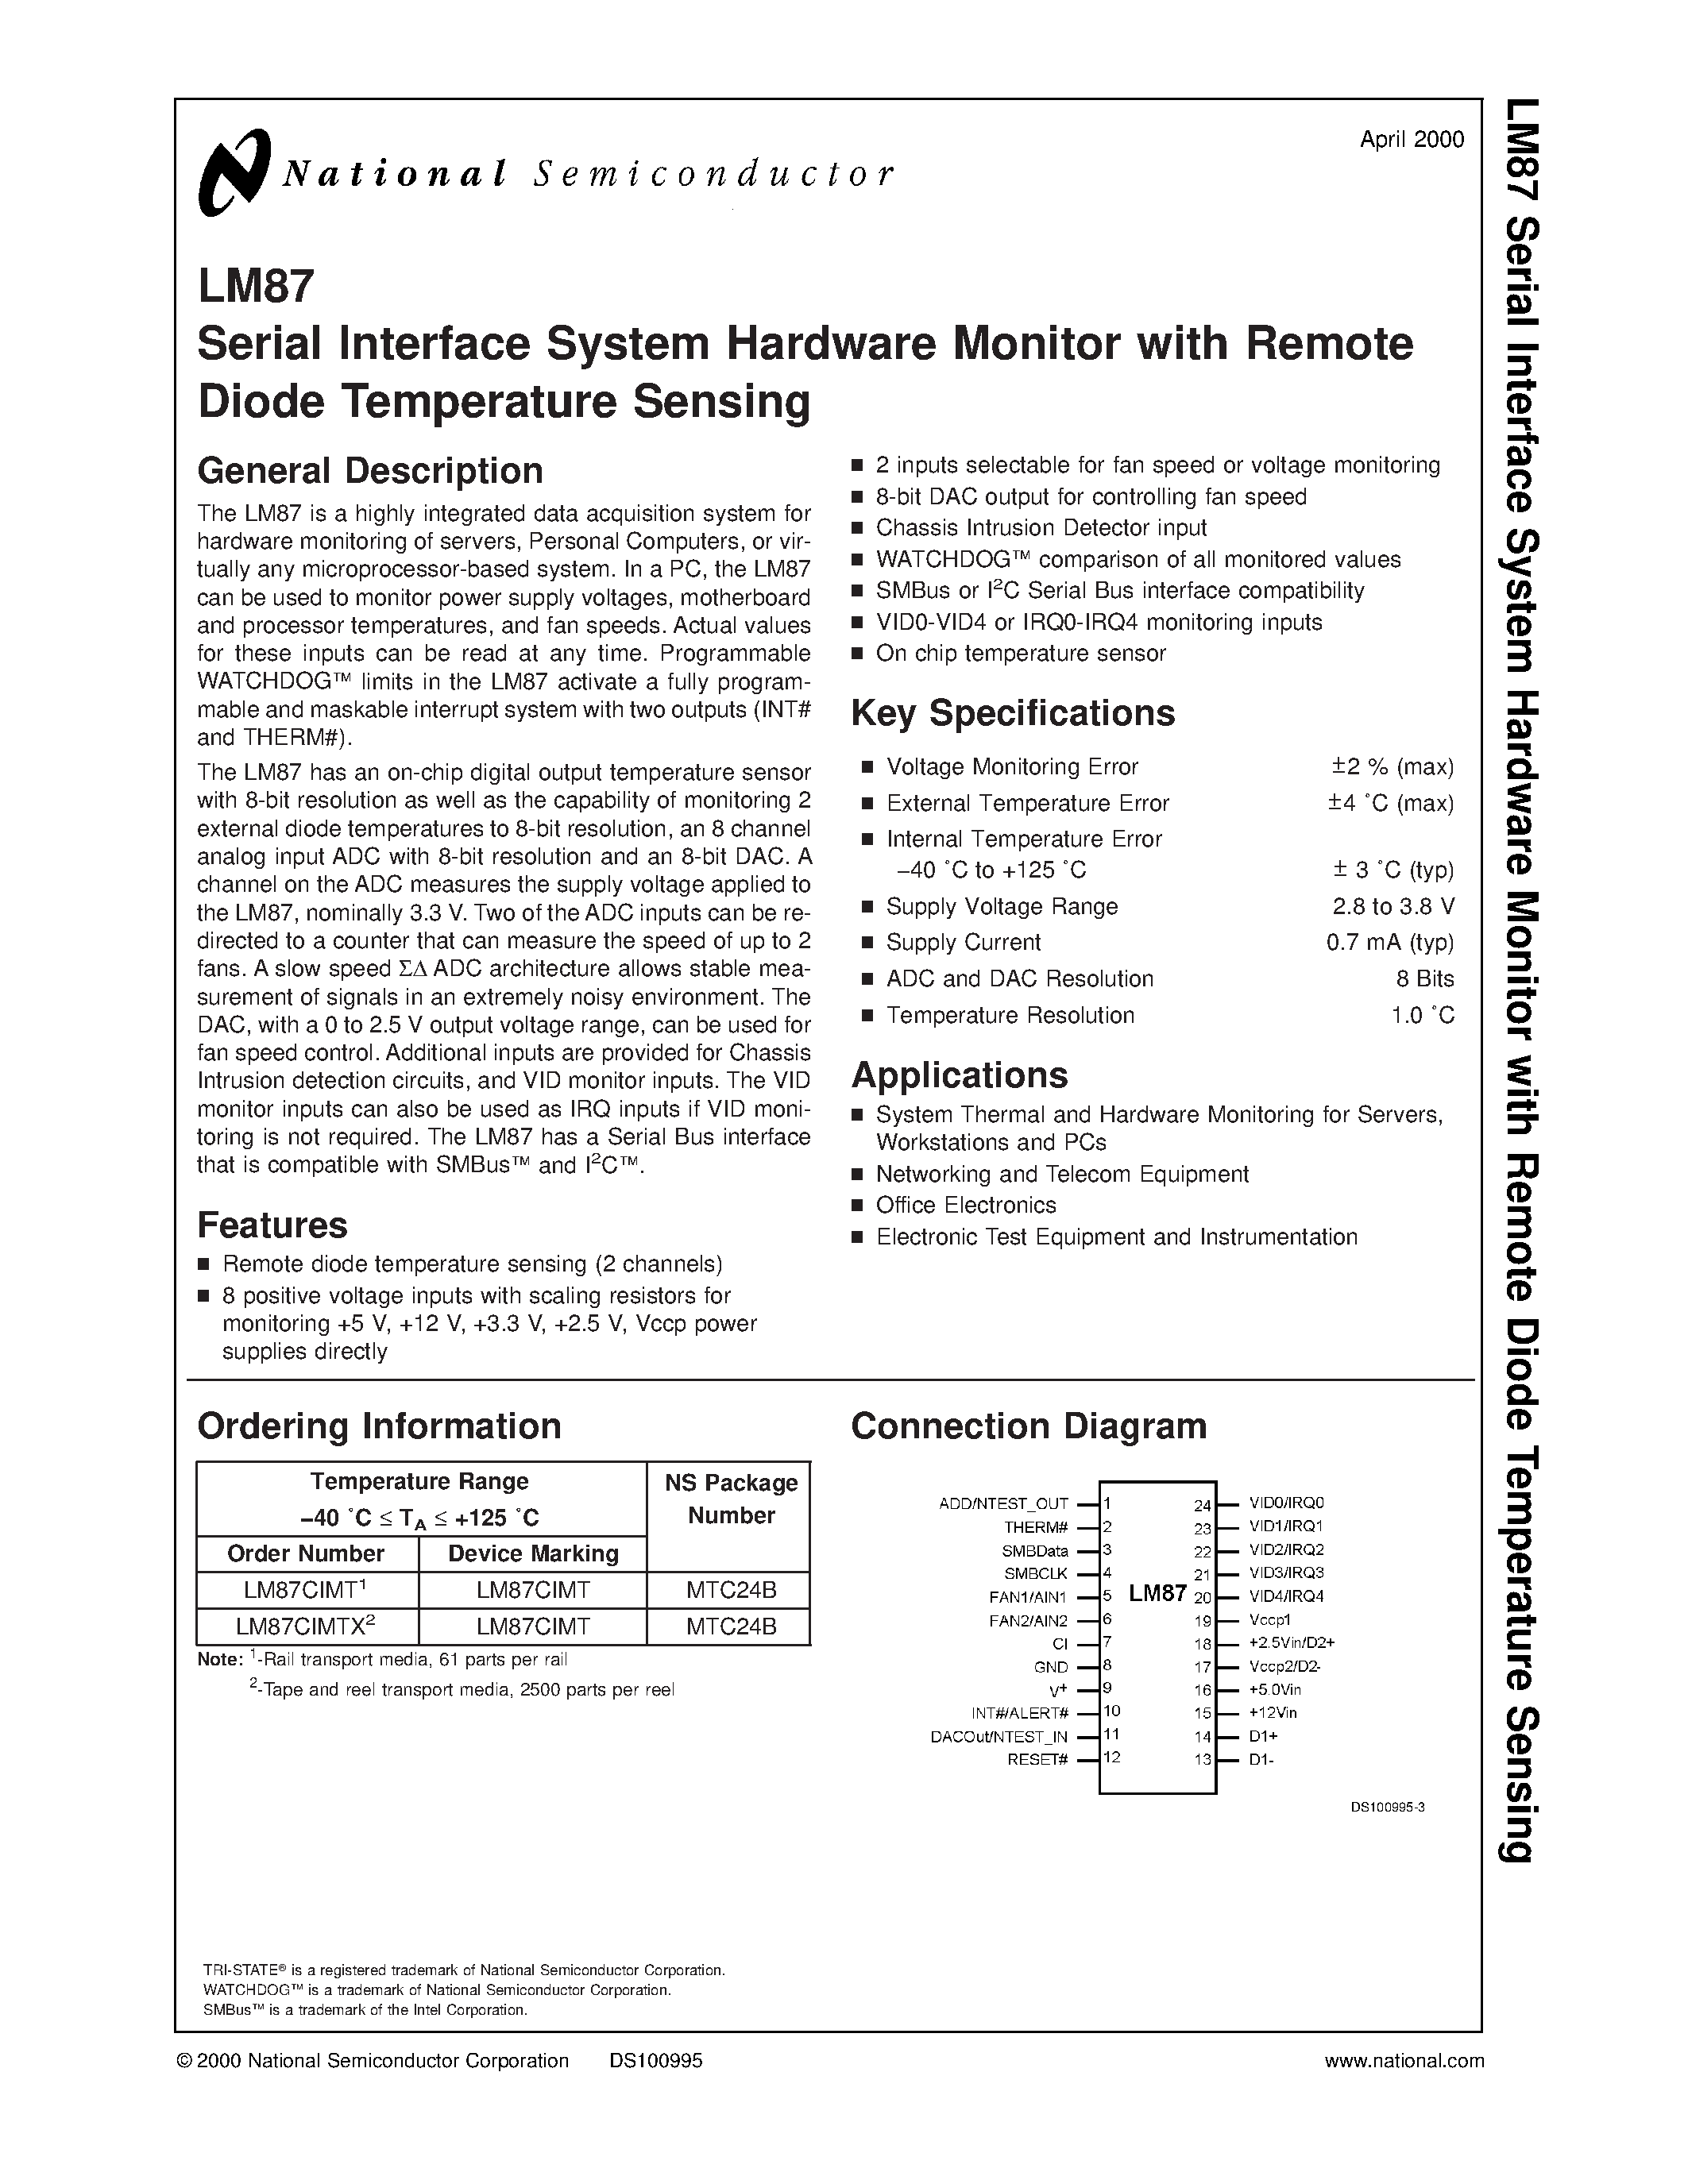 Datasheet LM87 - Serial Interface System Hardware Monitor with Remote Diode Temperature Sensing page 1